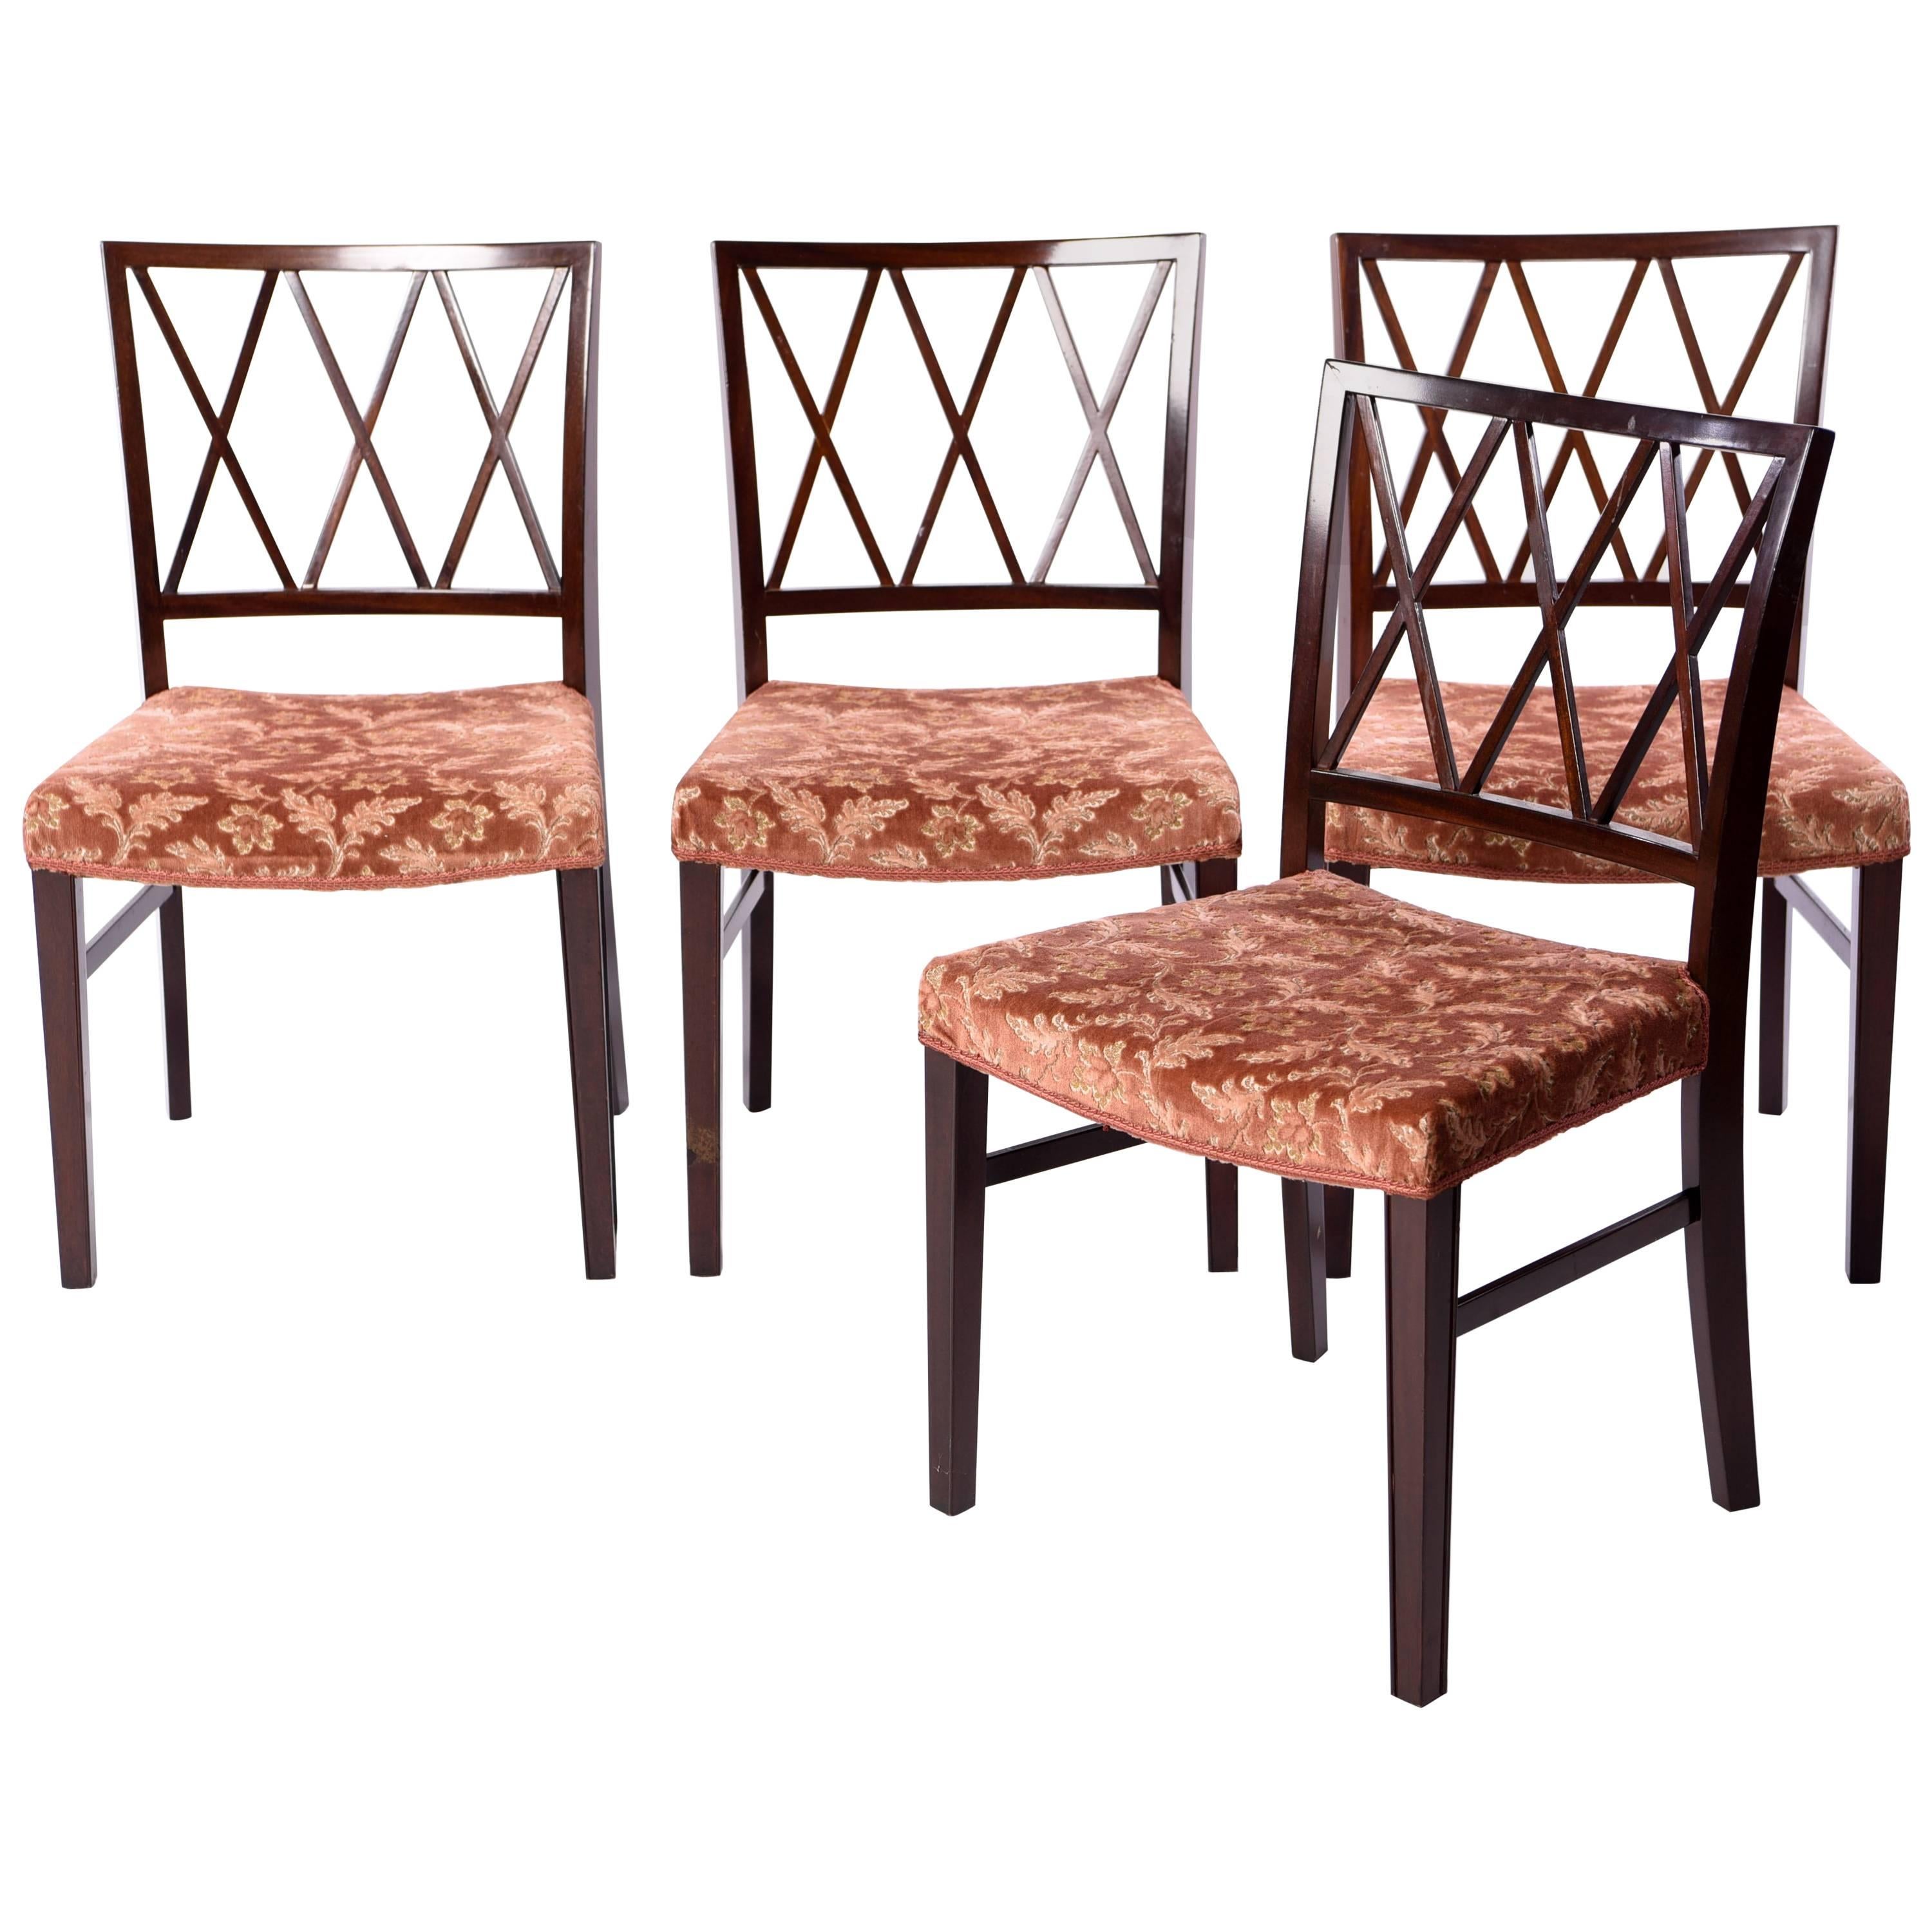 Ole Wanscher Set of Four Mahogany Dining Chairs for A. J. Iversen